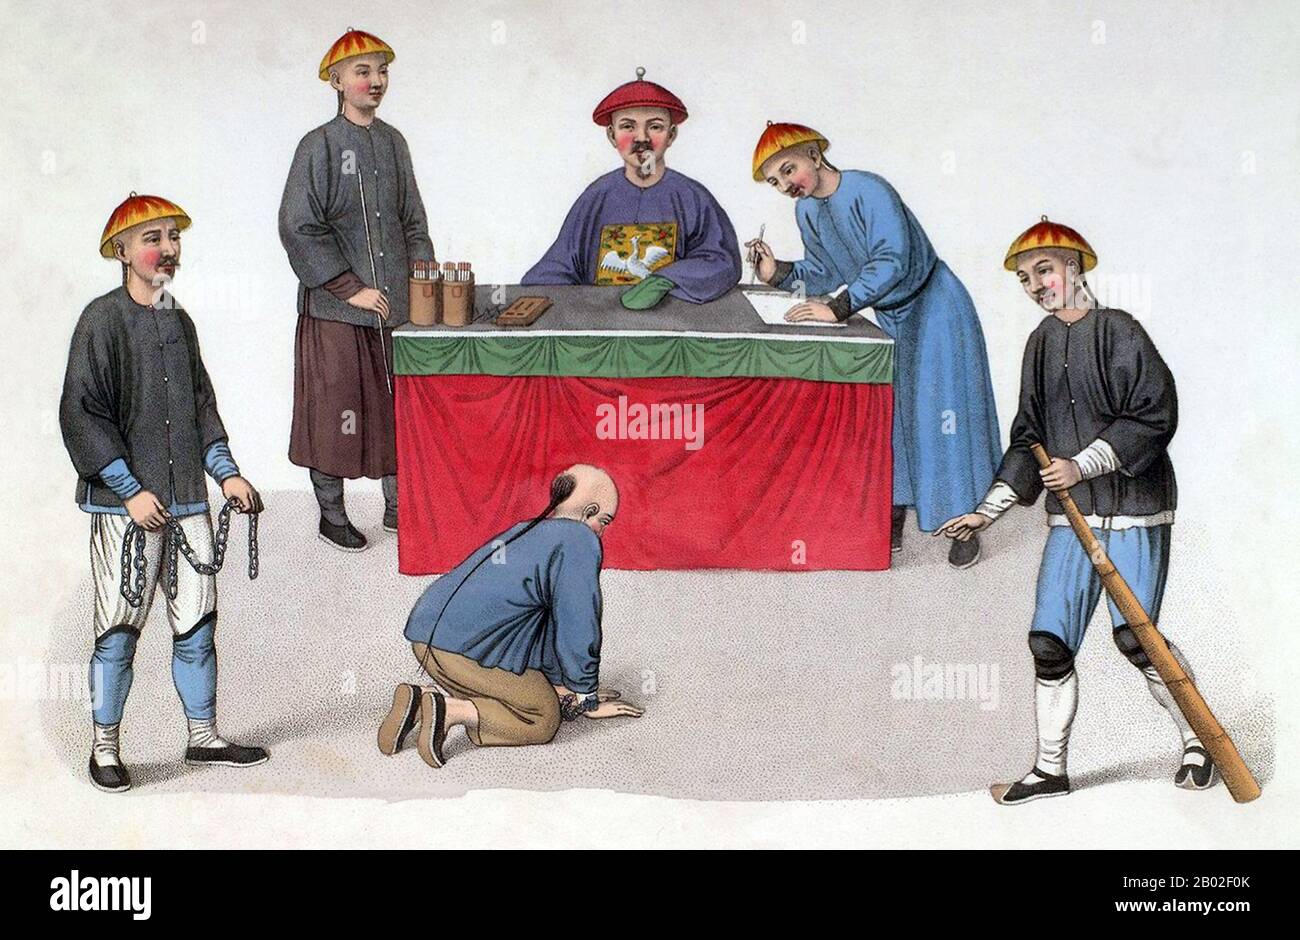 Attributed to the artist George Henry Mason, this work describes, in graphic detail, the forms of punishment deemed suitable for numerous crimes committed in China.  Each plate illustrates one type of torturous punishment from less severe penalties like 'Torturing the Fingers' and 'Twisting a Man's Ears', to the most serious 'The Manner of Beheading'. Stock Photo